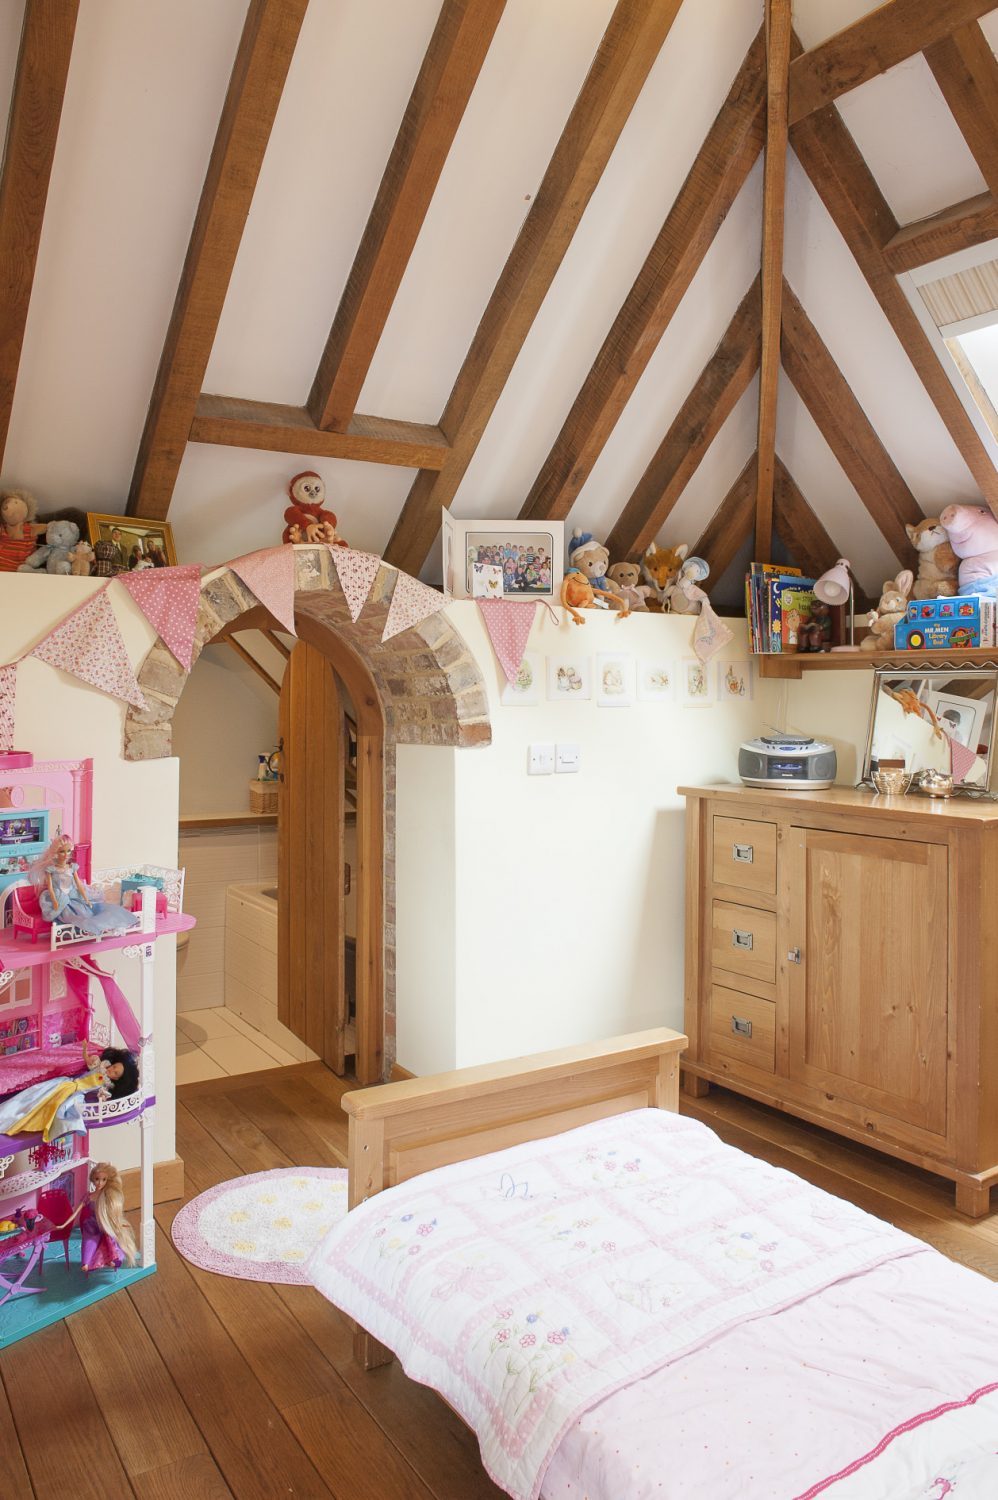 Katie has her own bathroom, accessed through a tiny child-sized doorway in her room. The floors are oak with – as elsewhere – underfloor heating powered by an air-source heat pump